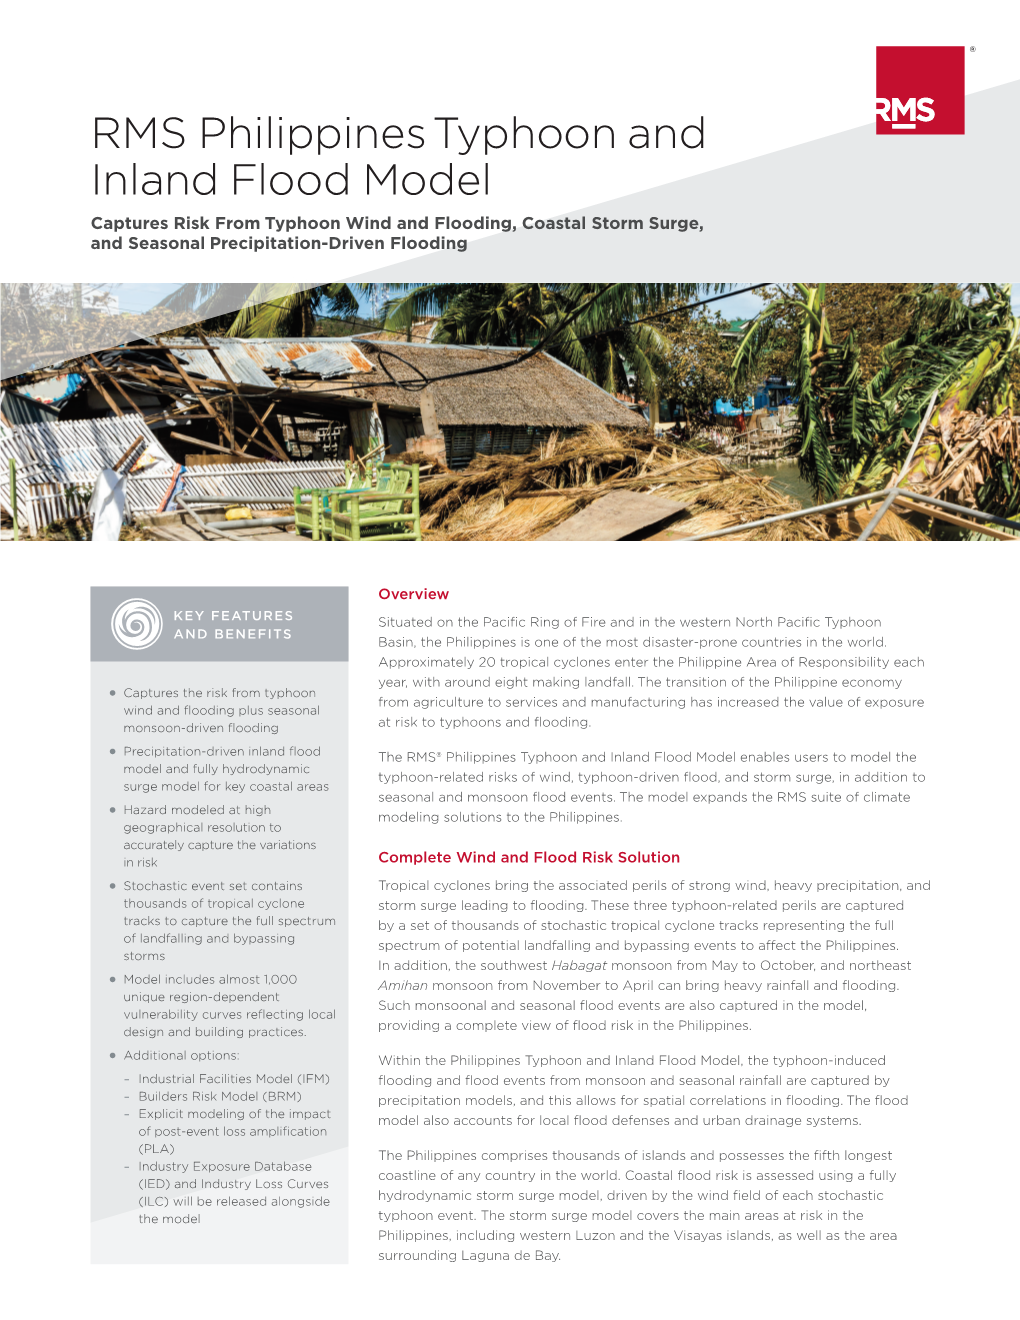 RMS Philippines Typhoon and Inland Flood Model Captures Risk from Typhoon Wind and Flooding, Coastal Storm Surge, and Seasonal Precipitation-Driven Flooding